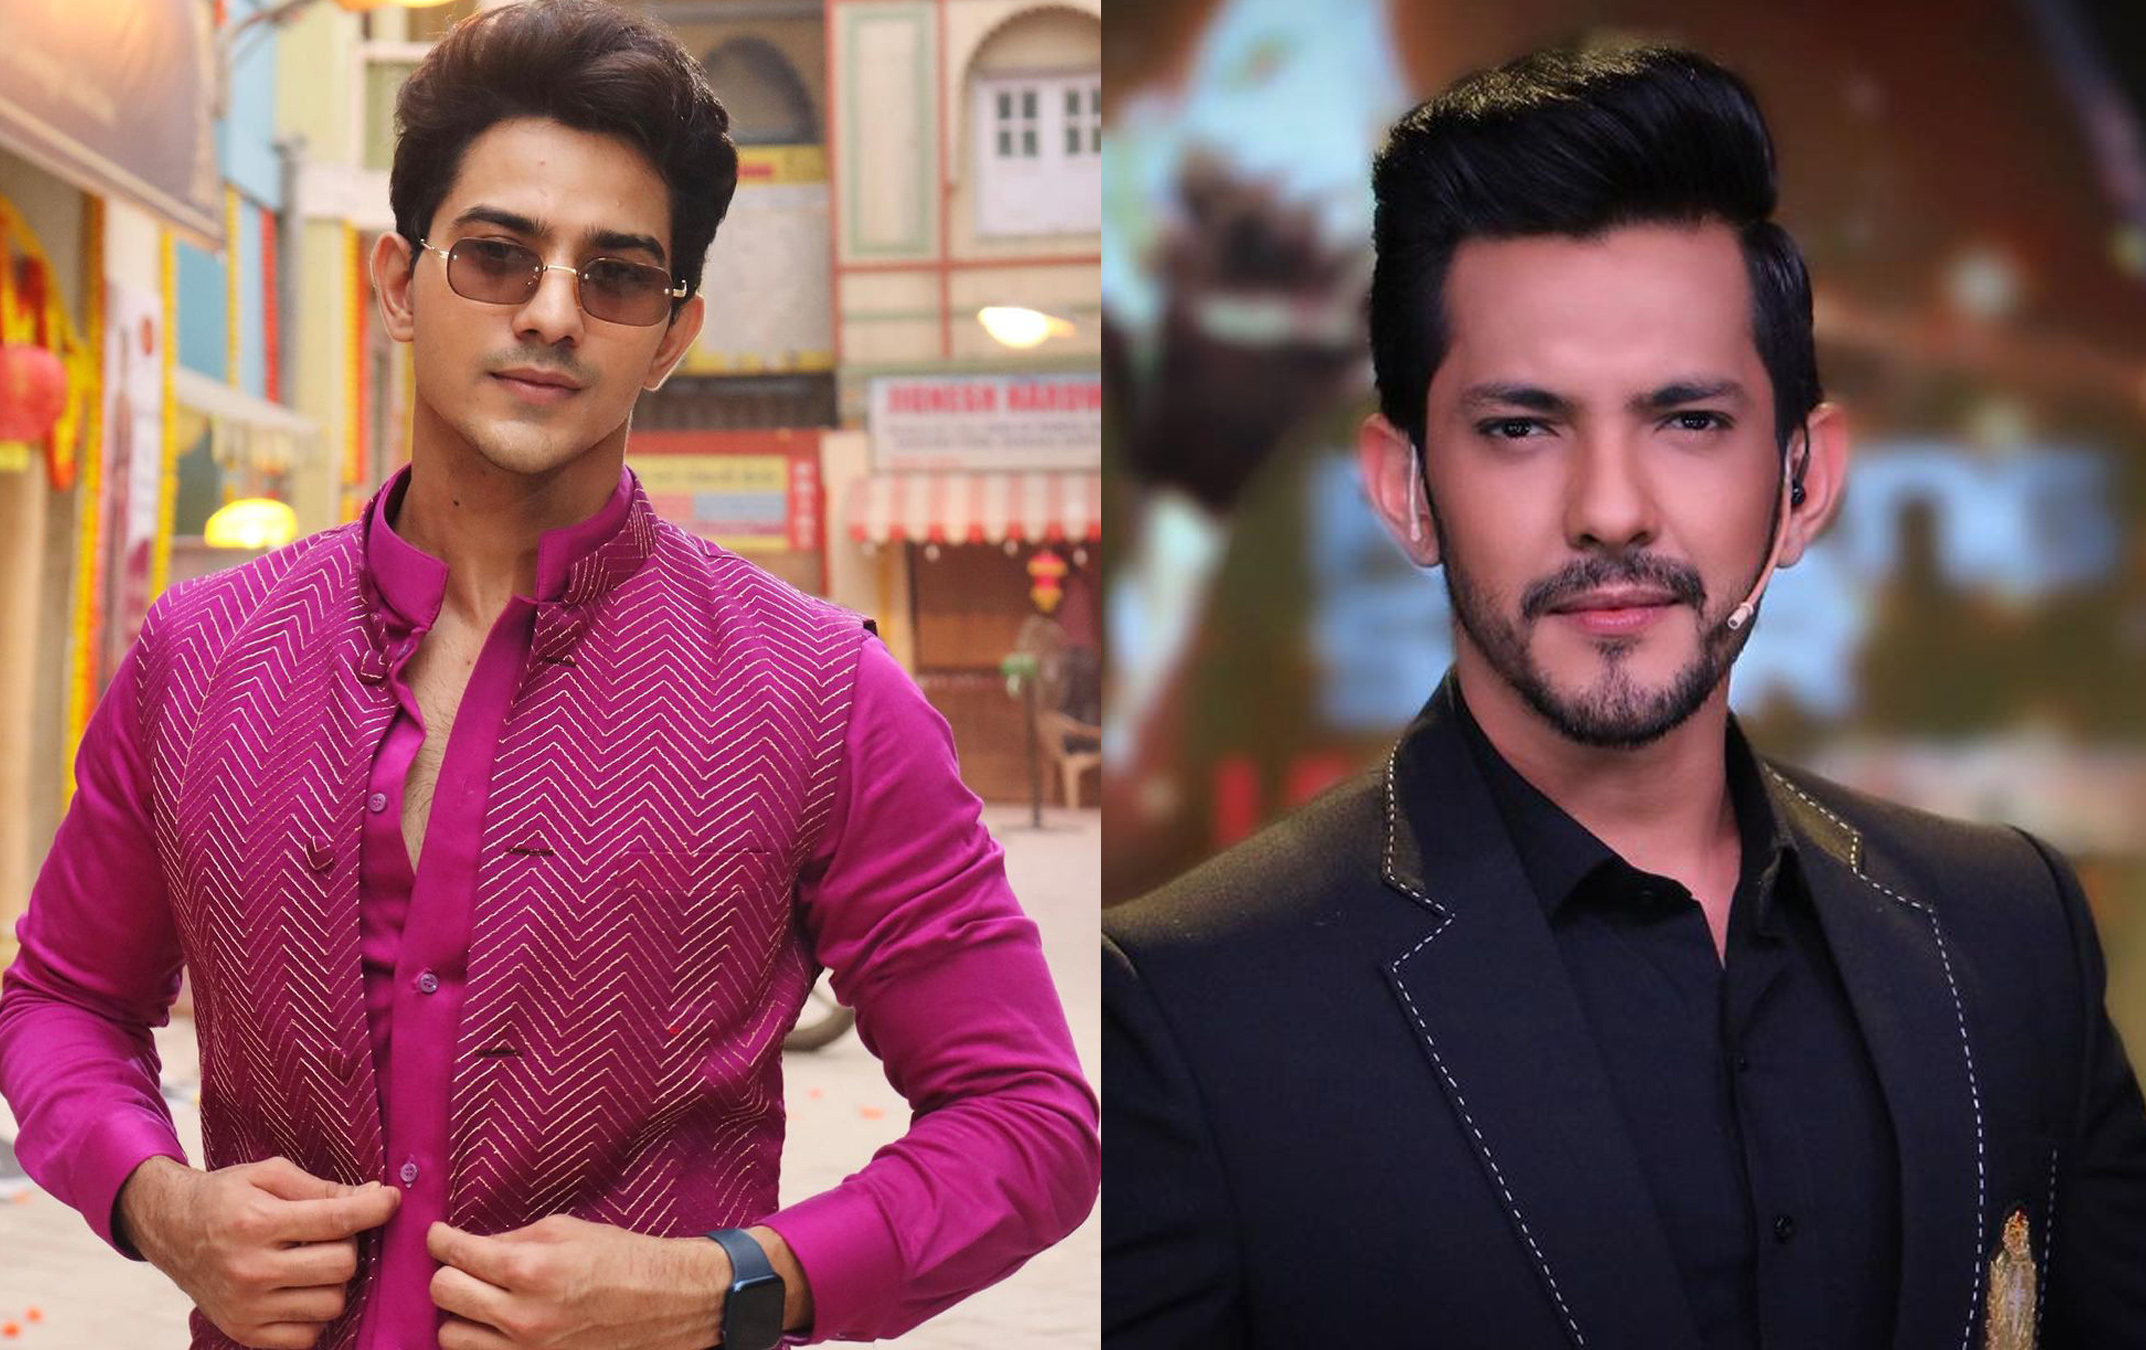 Actor Rohit Chandel Shares His Experience On Working With Singer Aditya Narayan. See What He Says! 